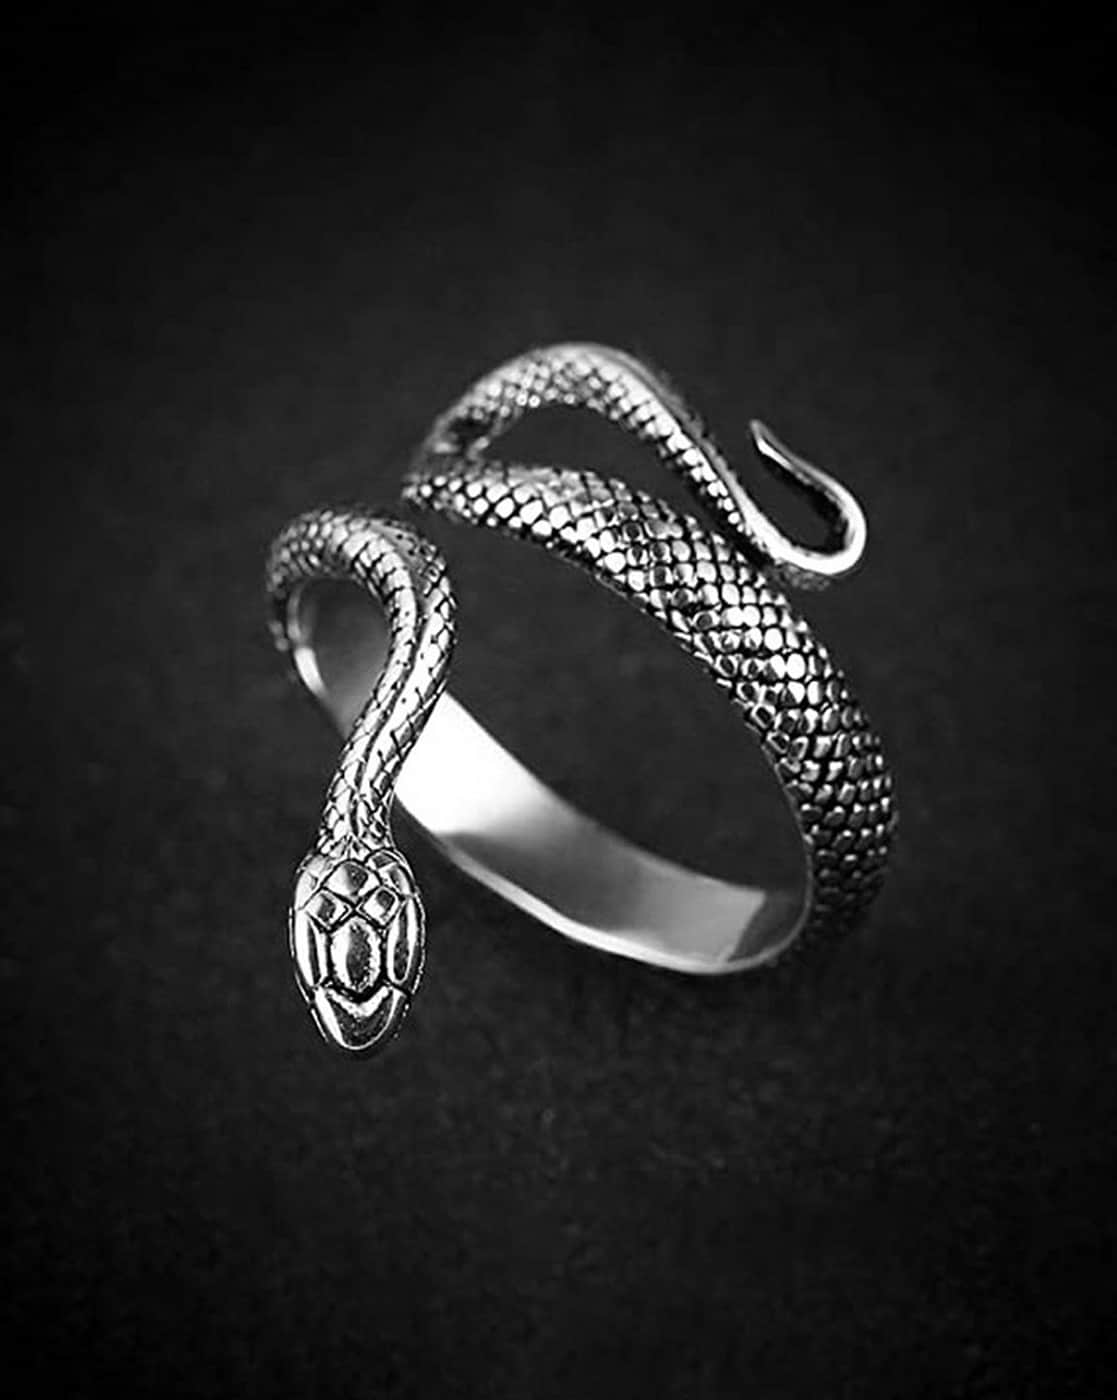 Amazon.com: OSALAD Animal Snake Ring 925 Silver Original S925 Sterling  Silver Rings for Women Men Jewelry Adjustable Size : Clothing, Shoes &  Jewelry